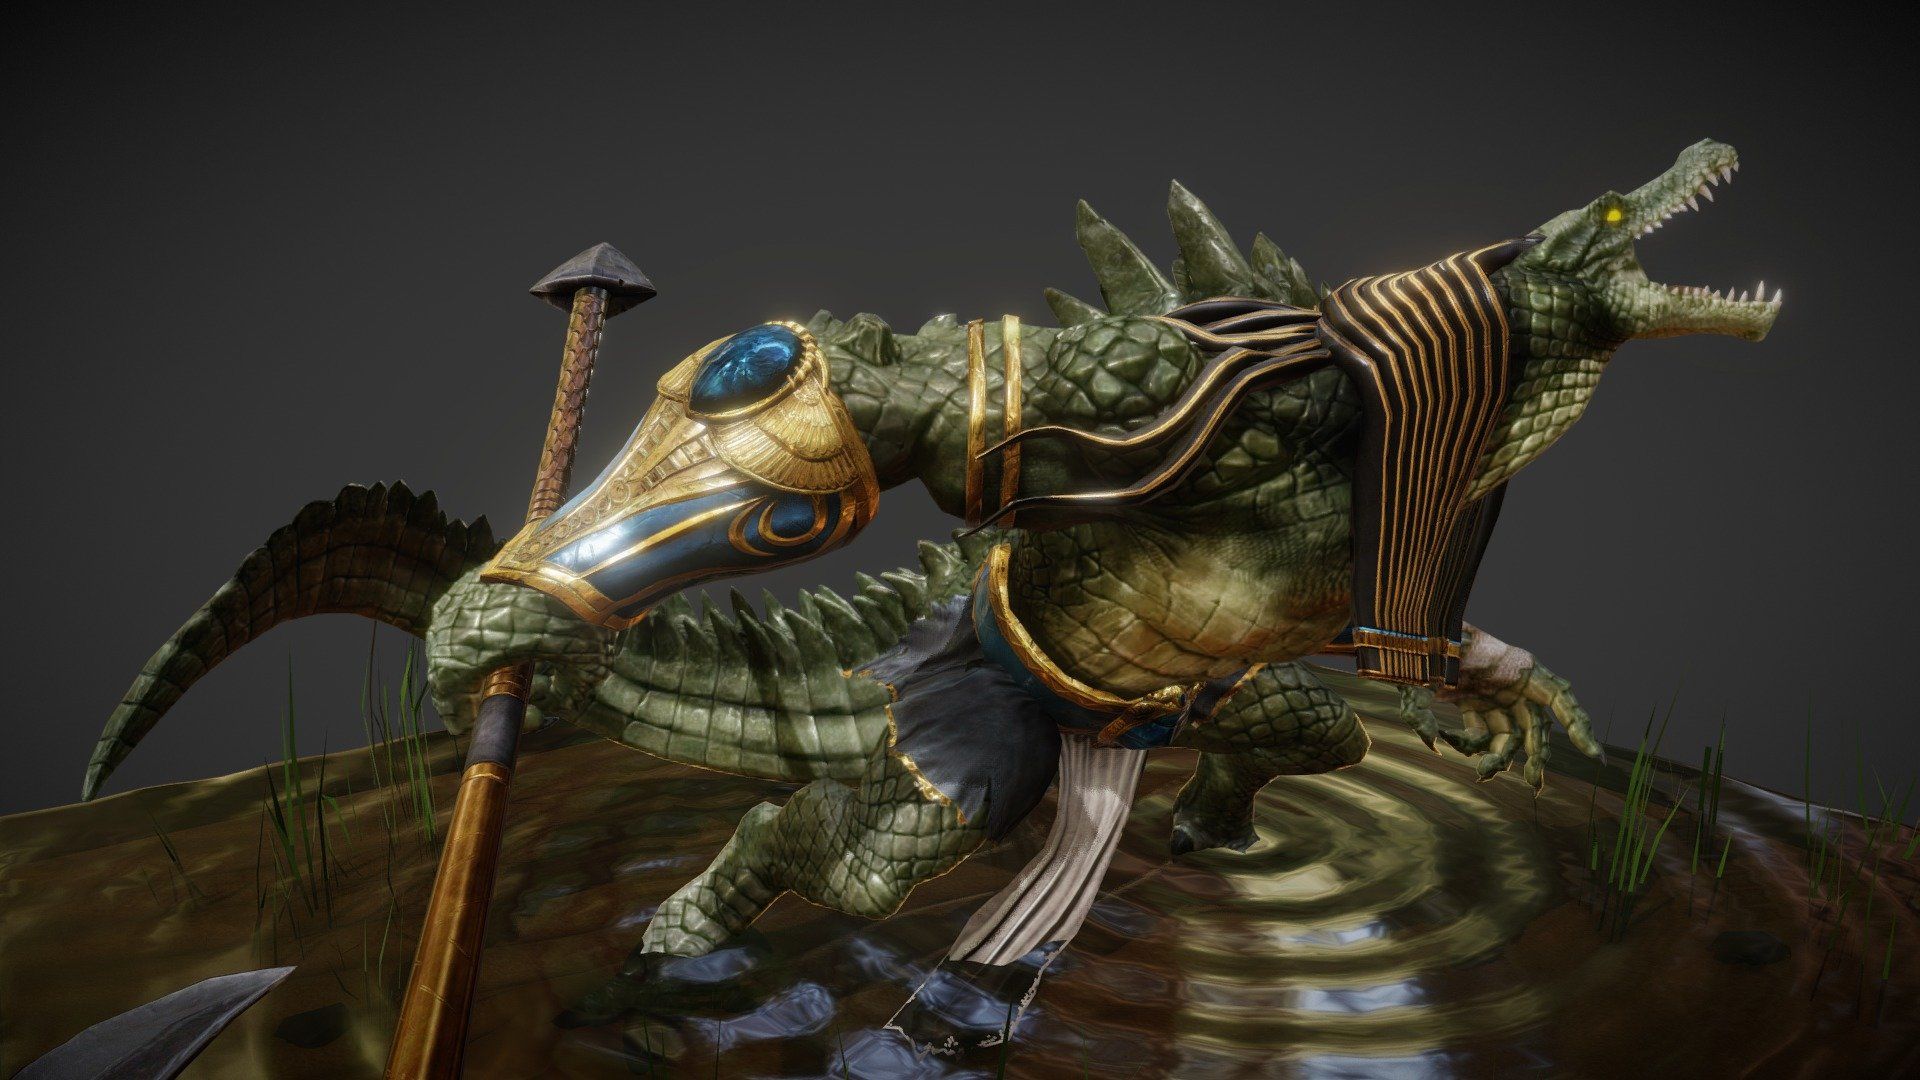 sobek was from where